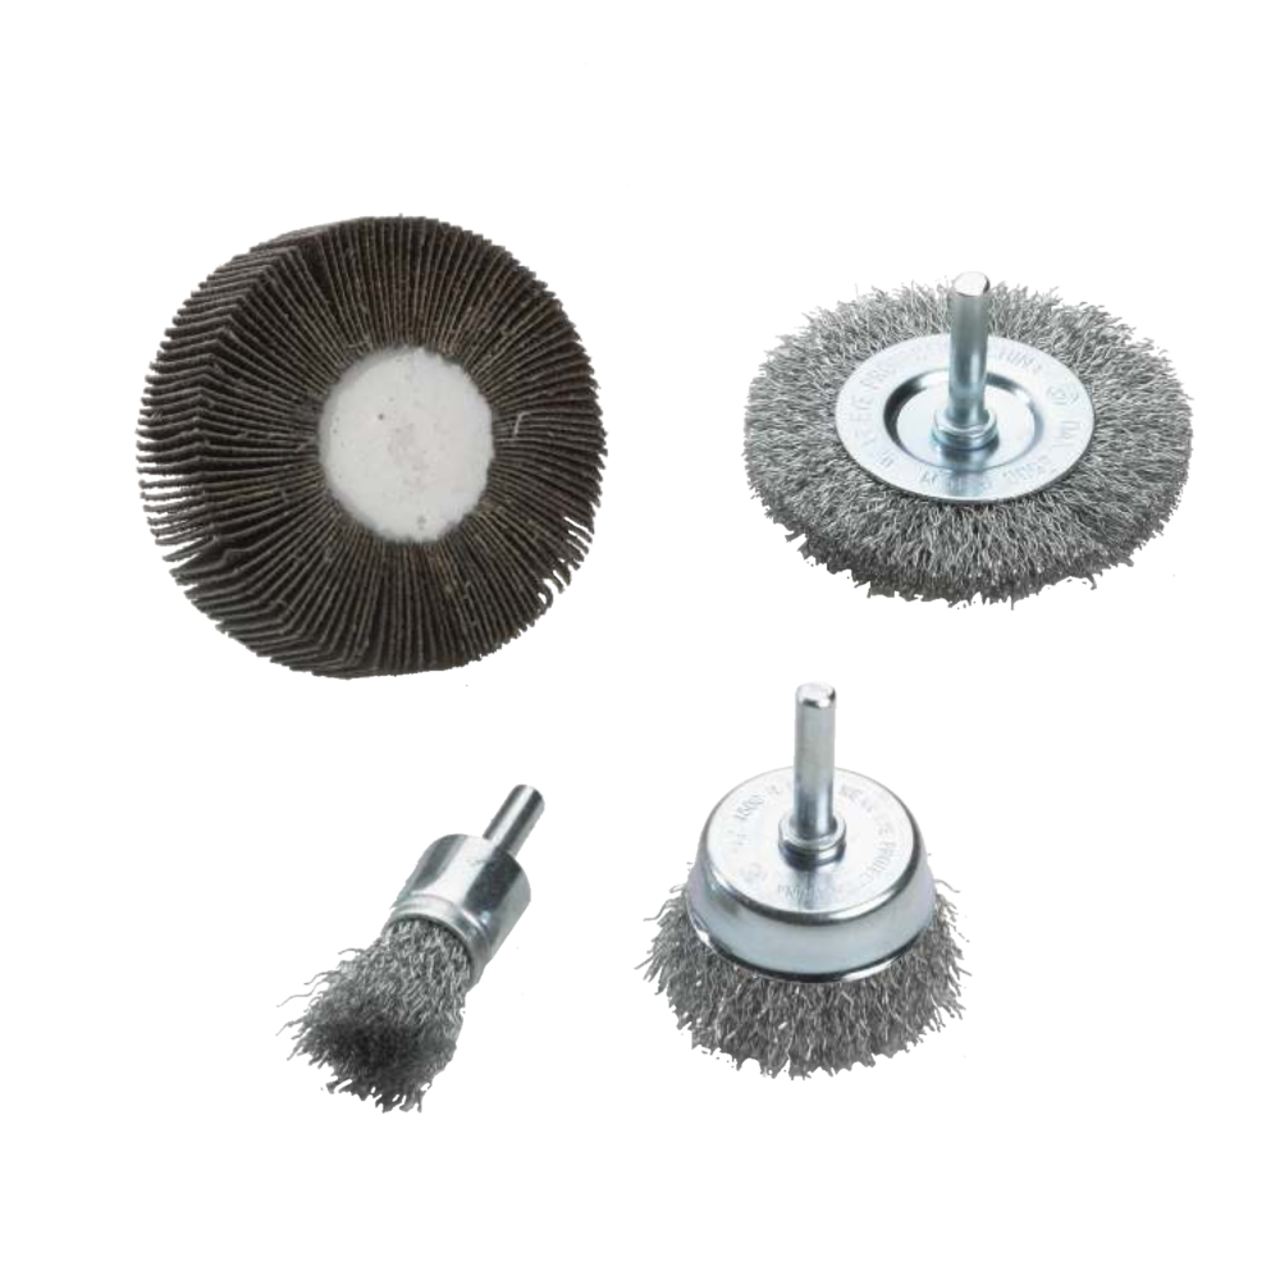 https://media-www.canadiantire.ca/product/fixing/tools/power-tool-accessories/0541301/mastercraft-4pc-removal-set-with-wire-wheels-cup-brushes-370115e6-293d-4df0-9cb2-32dde87492e5.png?imdensity=1&imwidth=640&impolicy=mZoom